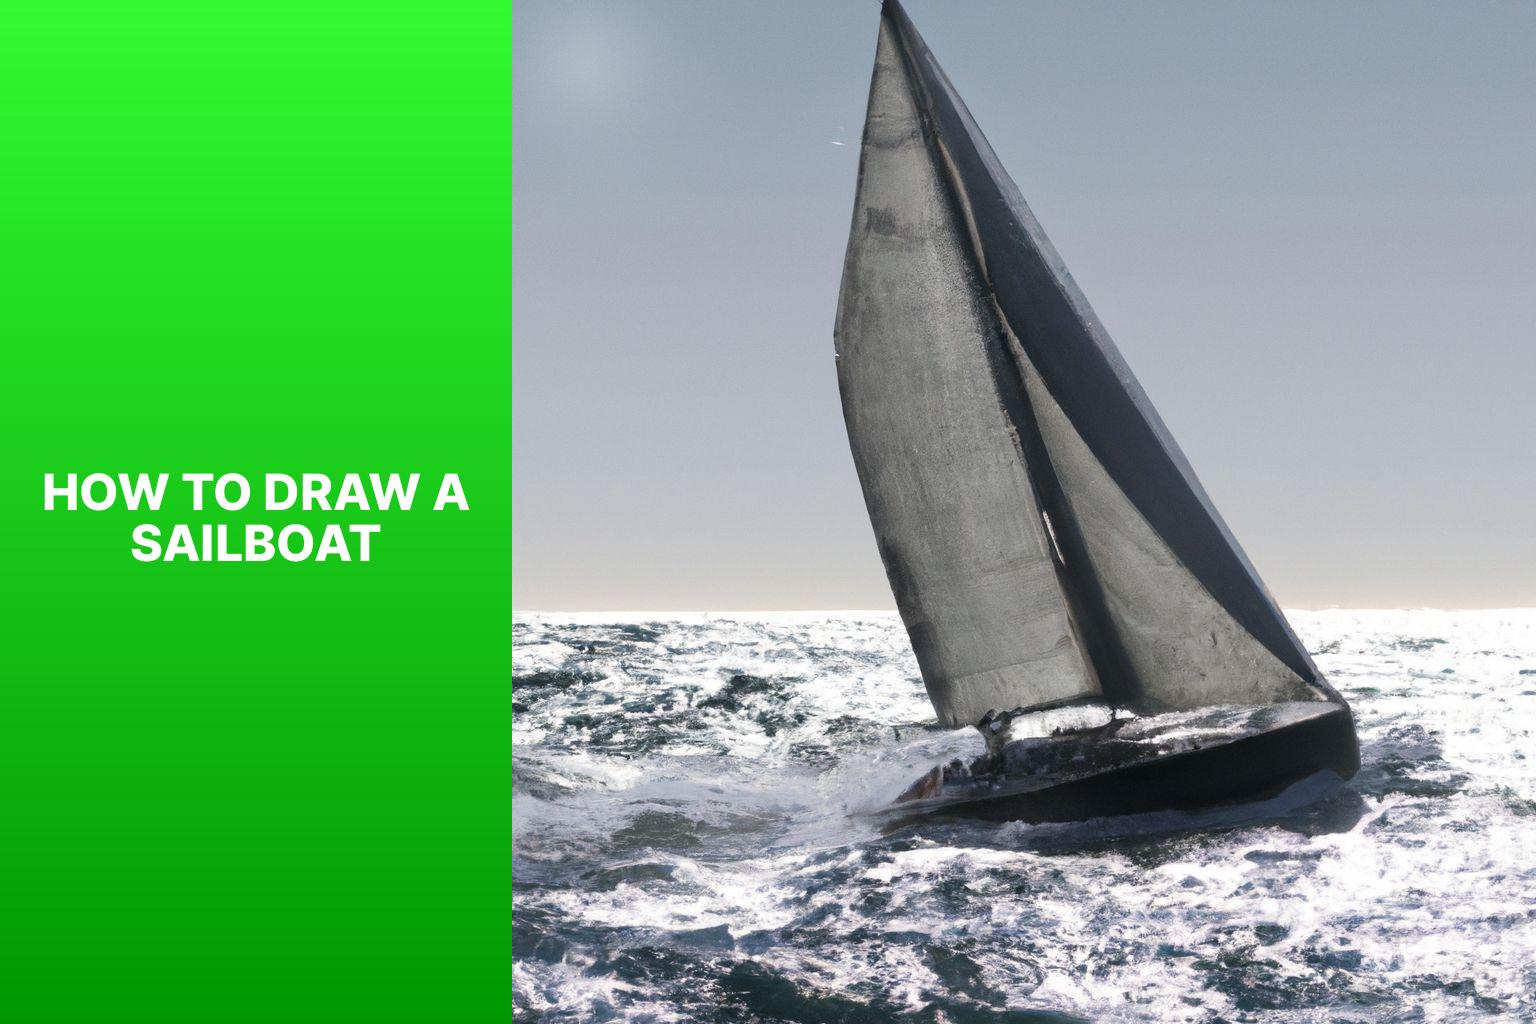 Learn How To Draw A Sailboat – Step-By-Step Tutorial and Tips